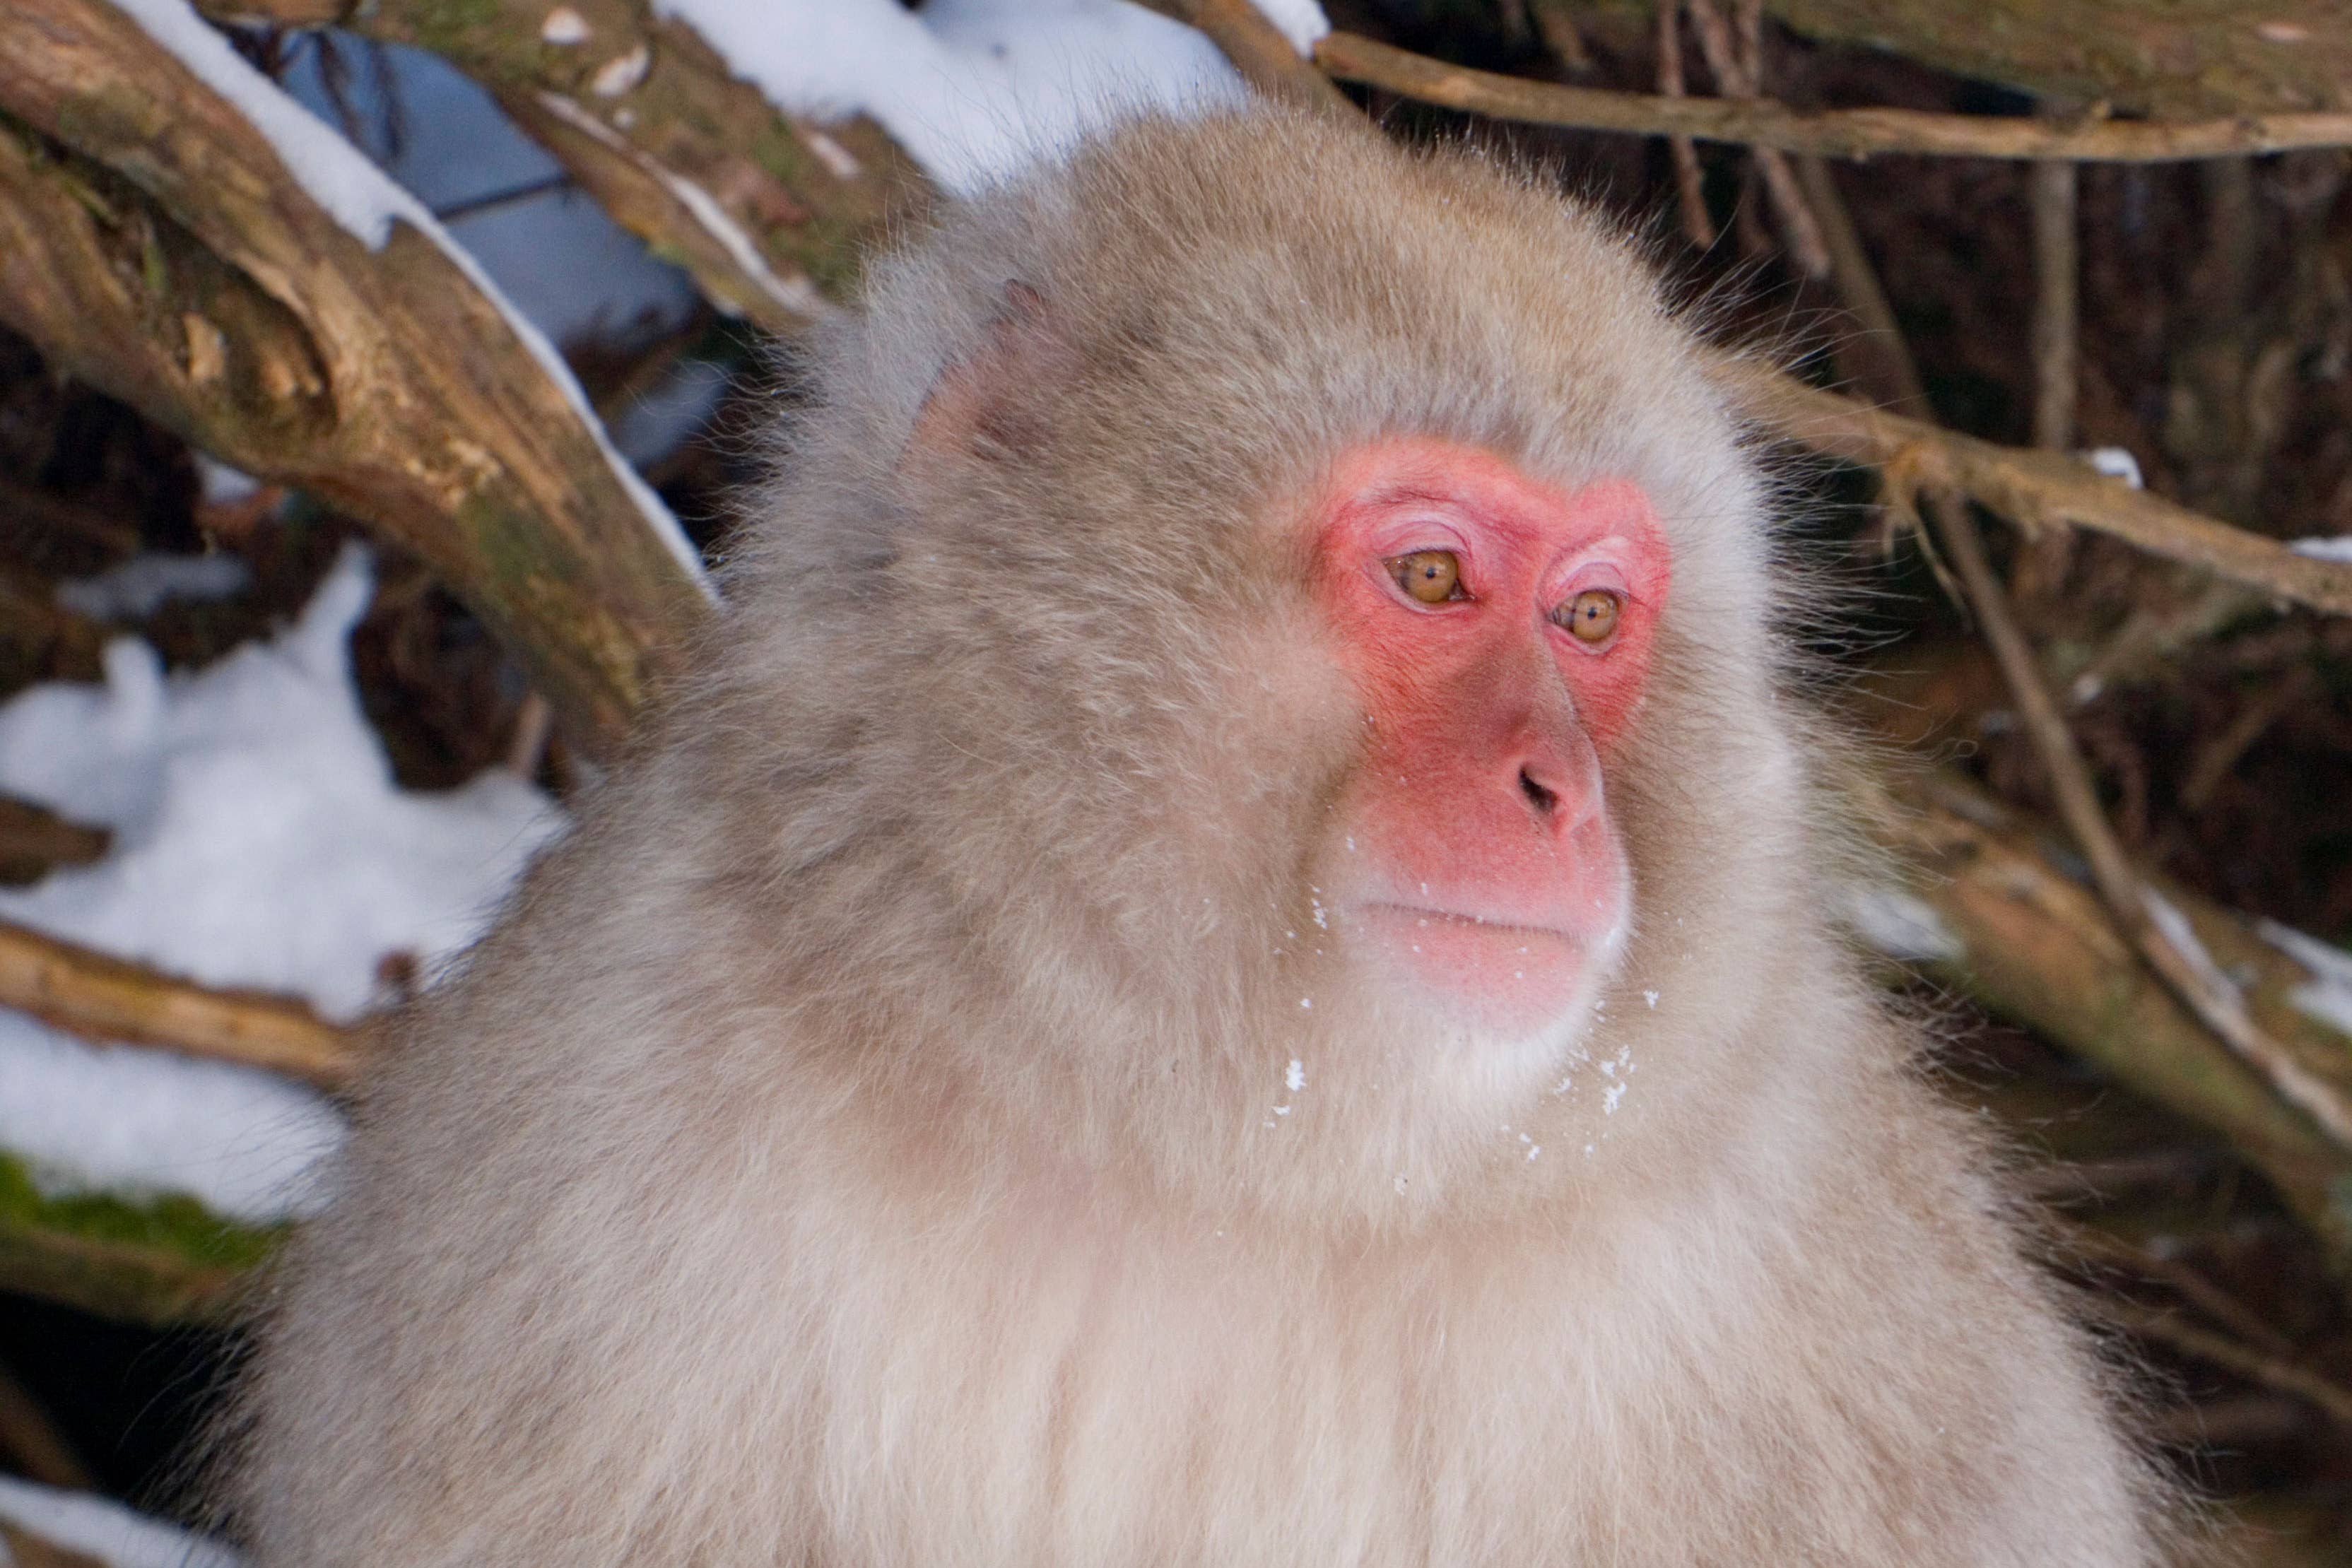 Japanese macaque have human-like naked faces and expressive eyes